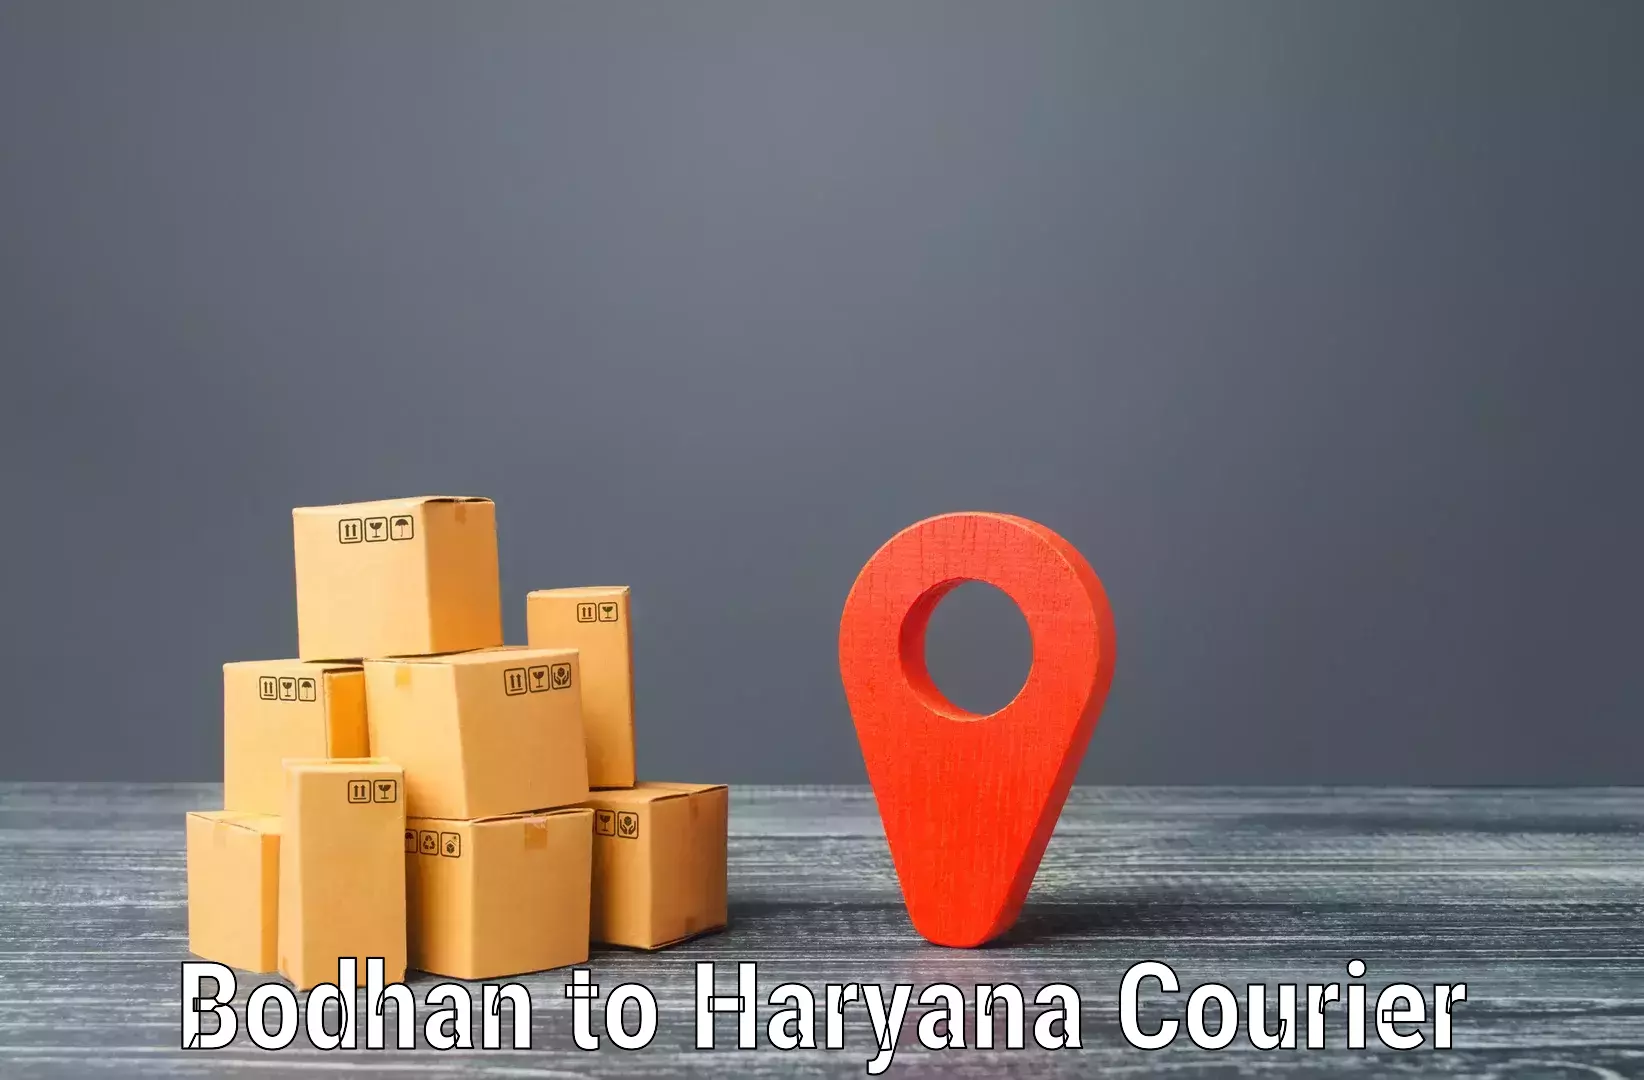 Residential courier service in Bodhan to NCR Haryana